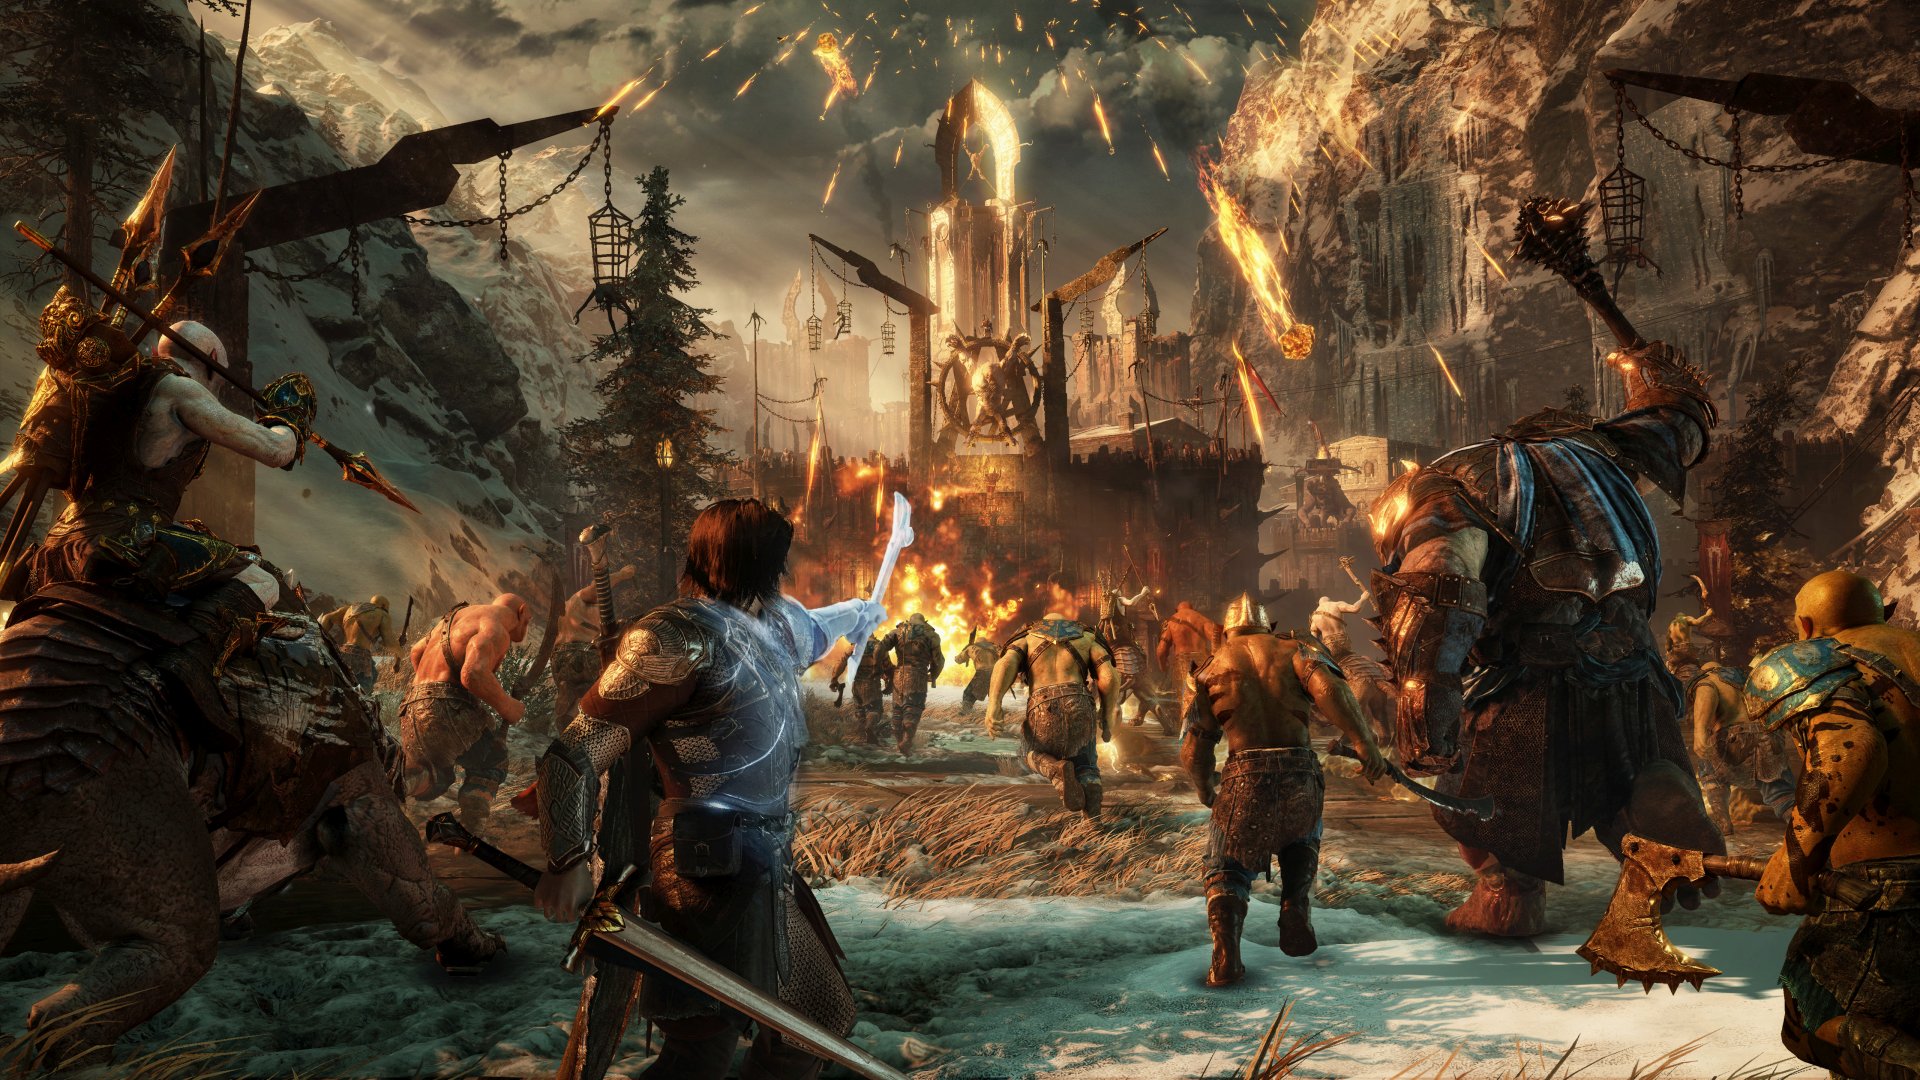 Middle-earth: Shadow of War Available Now on Xbox One and Windows 10